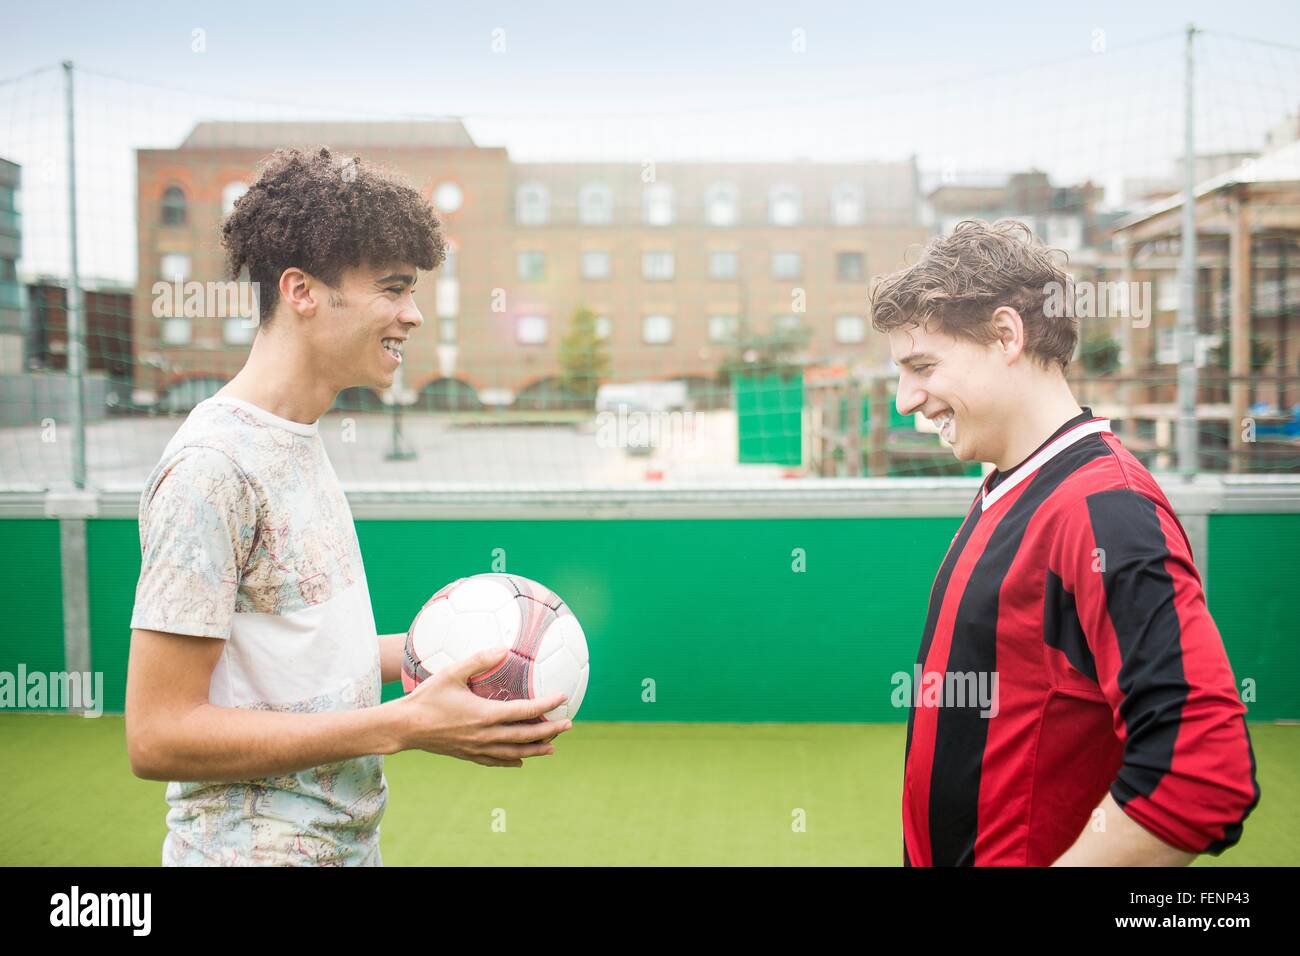 Two young men playing football on urban football pitch Stock Photo